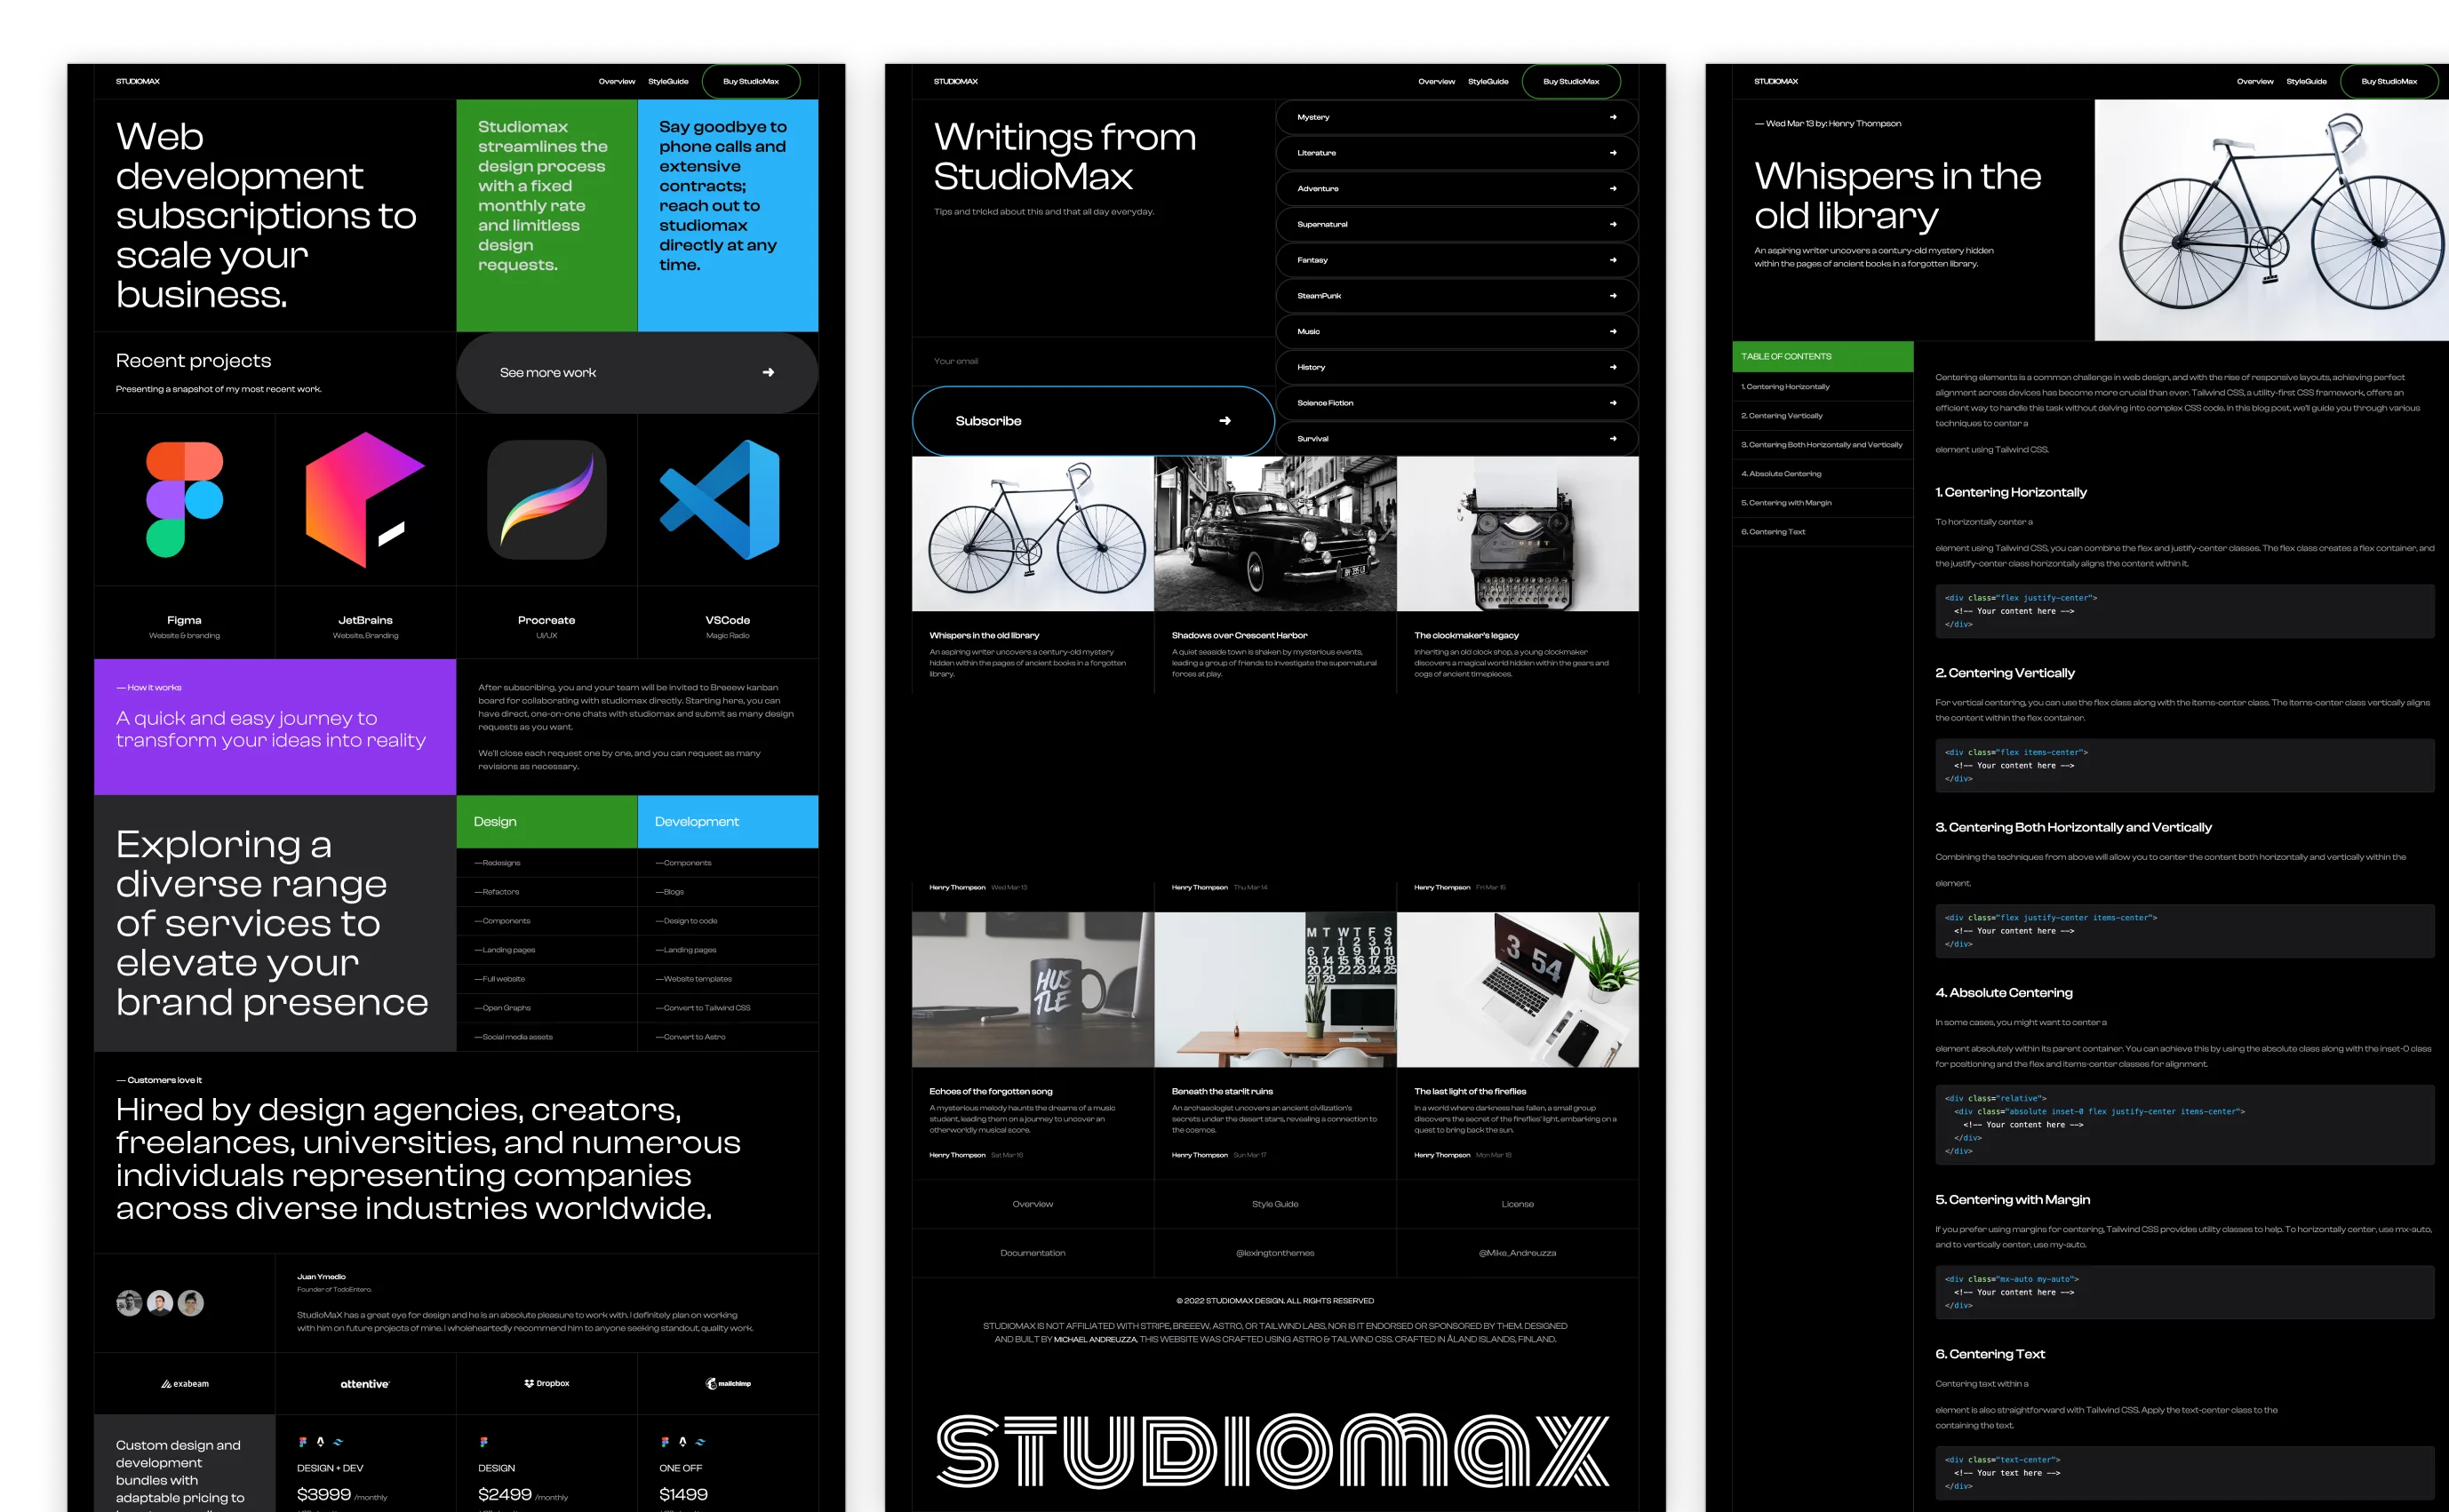 StudioMax theme for web development services, featuring a dark mode design with colorful accents for vibrant visual contrast. The layout includes sections for service offerings, project showcases, design and development processes, and collaboration tools with detailed textual and graphical content.